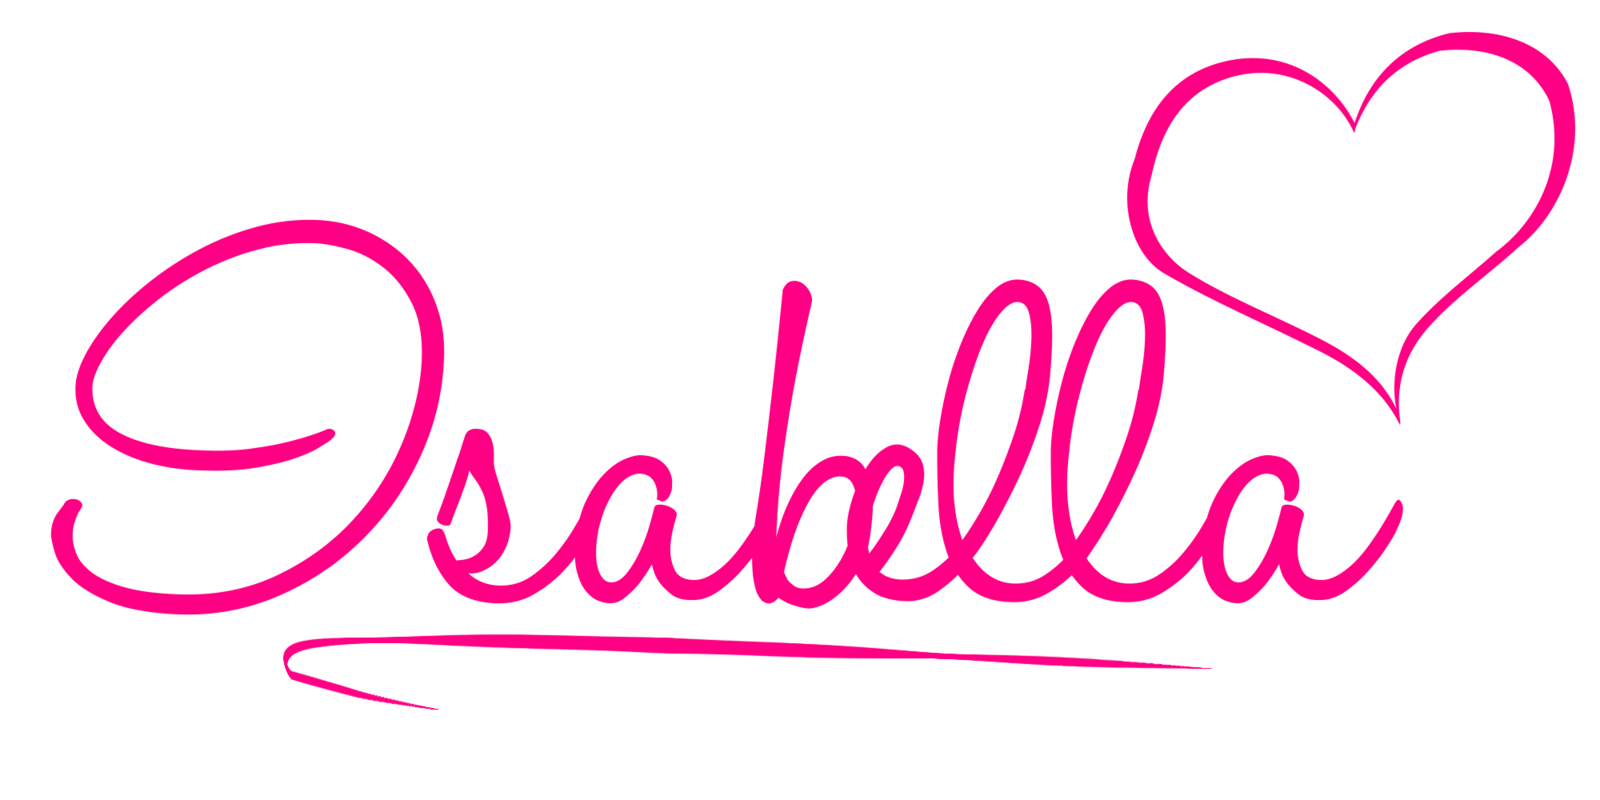 Isabella name logo by bloom914 on